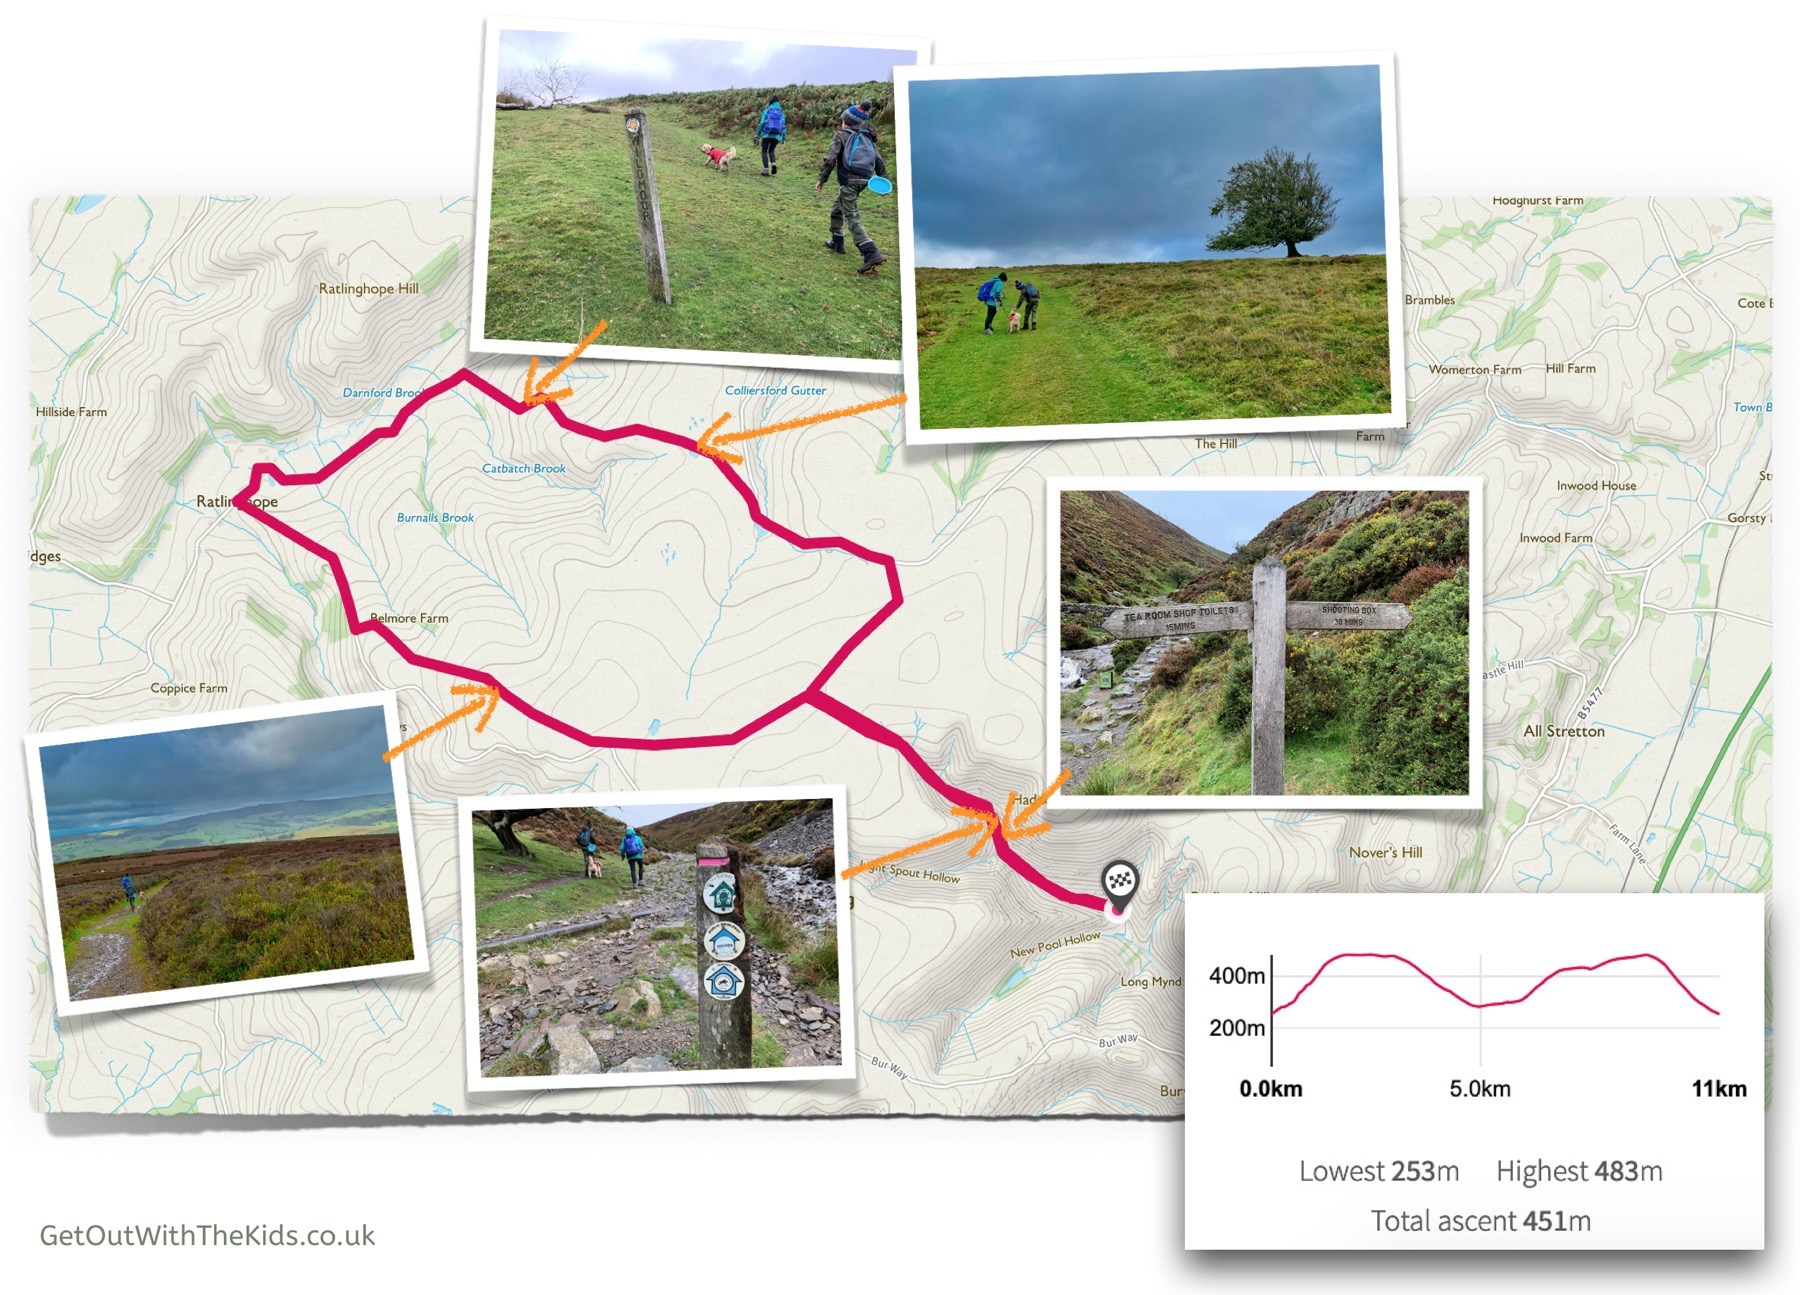 Route Map and Photos